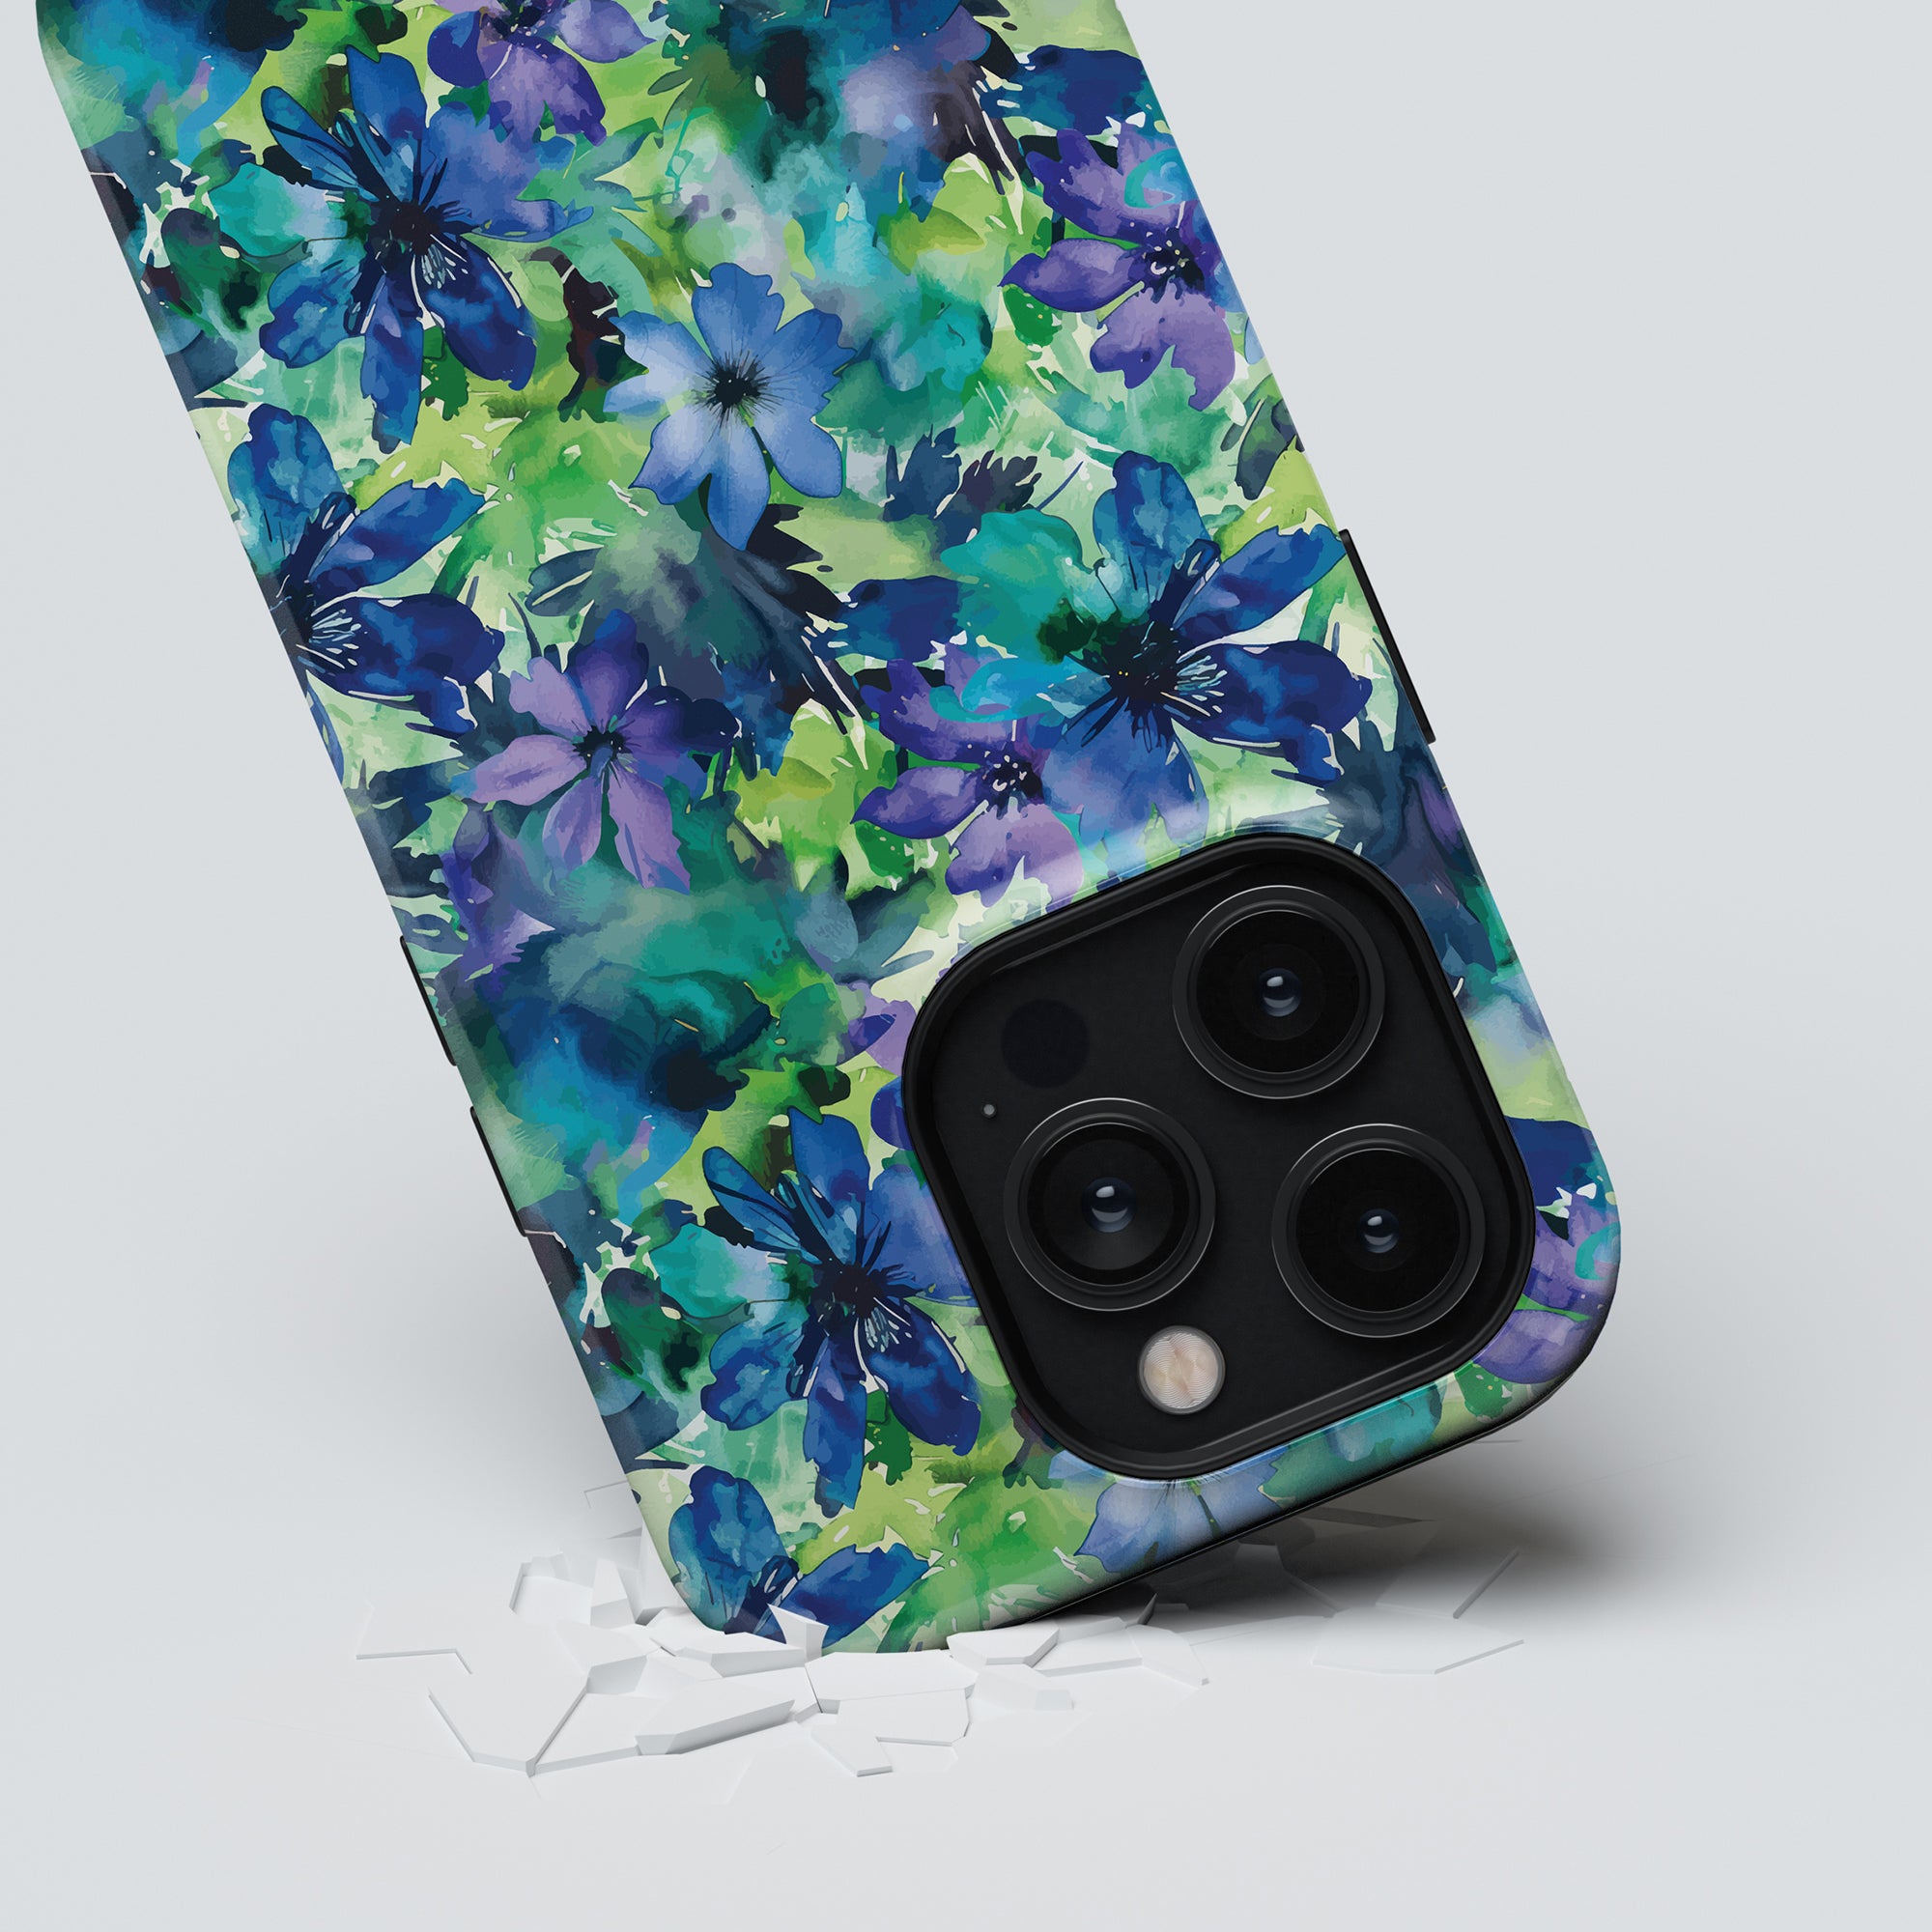 A smartphone from the Floral Collection, adorned with a green and blue floral patterned Sweet Flower - Tough Case, rests against a light background with scattered white pieces around it. The camera lenses are visible.